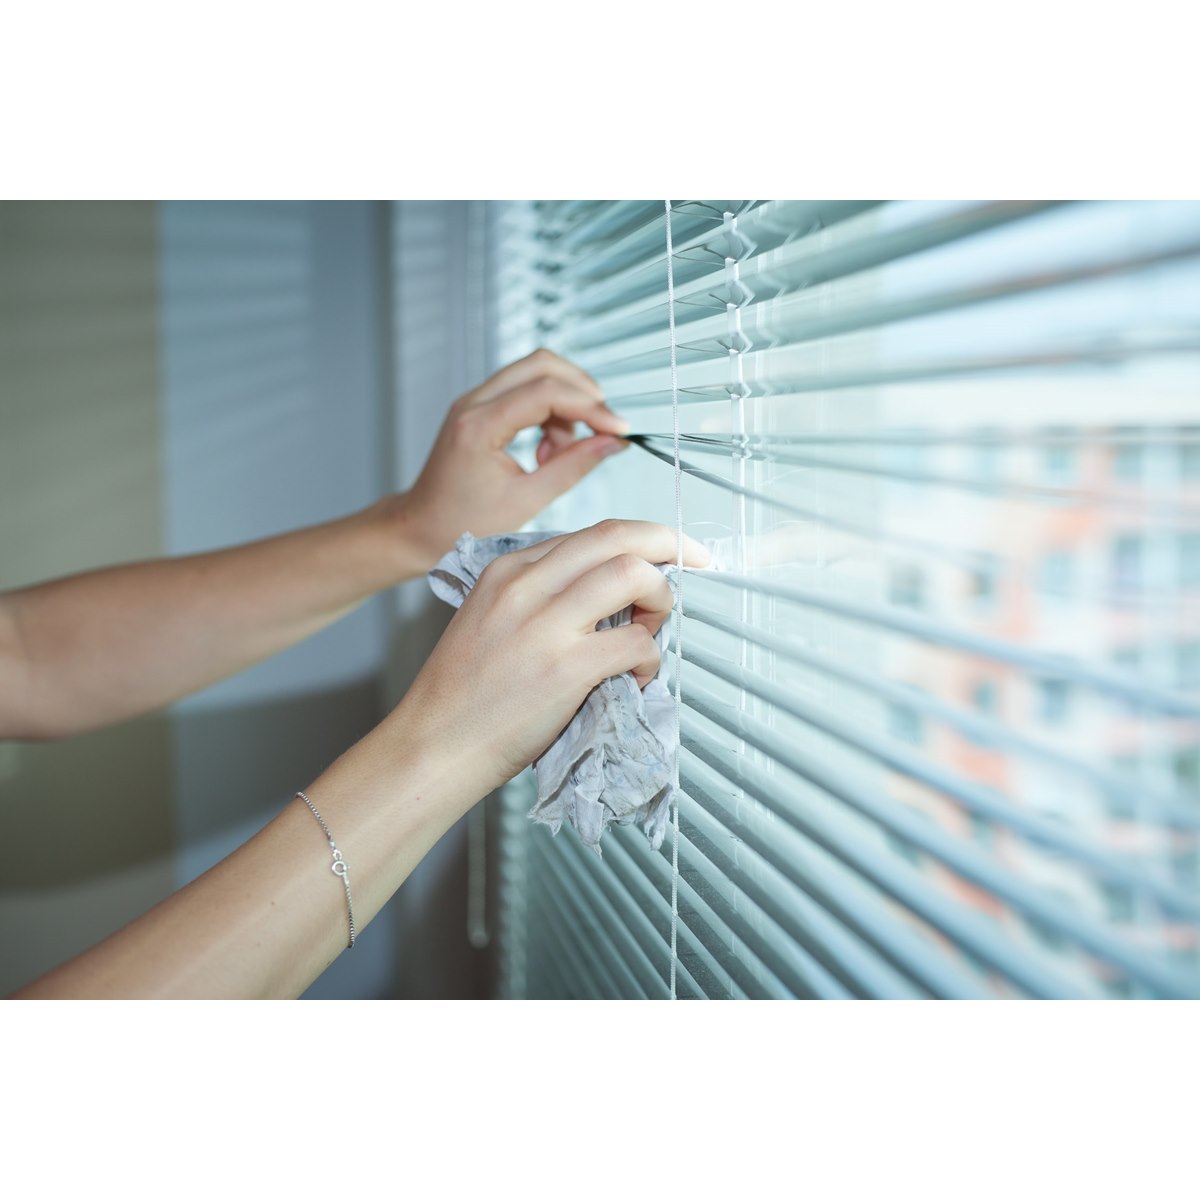 How to clean Blinds